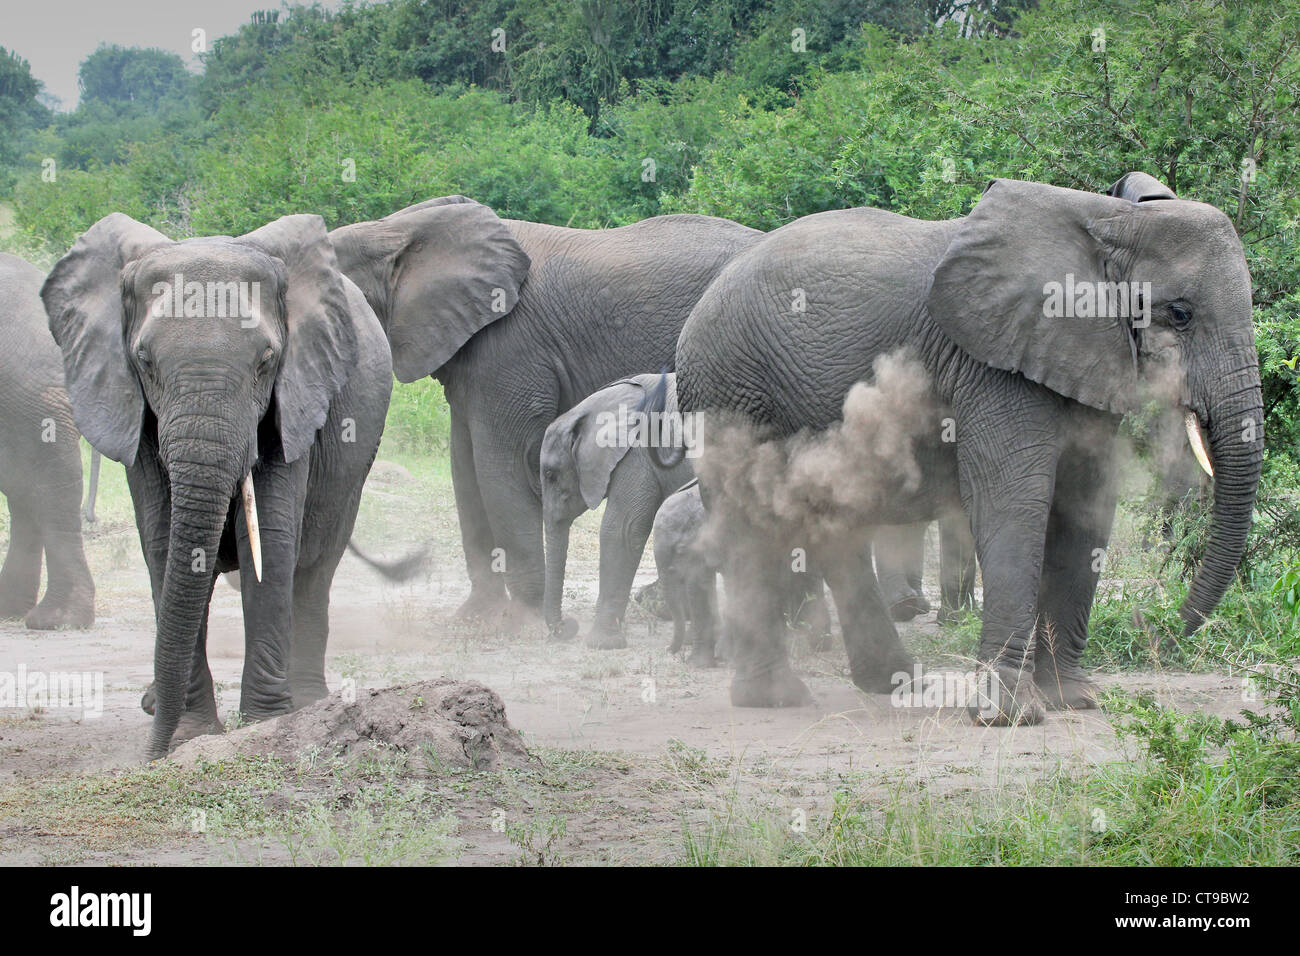 WILD African Elephants camouflage by throwing dirt on themselves with their trunk in Uganda, Africa. Stock Photo